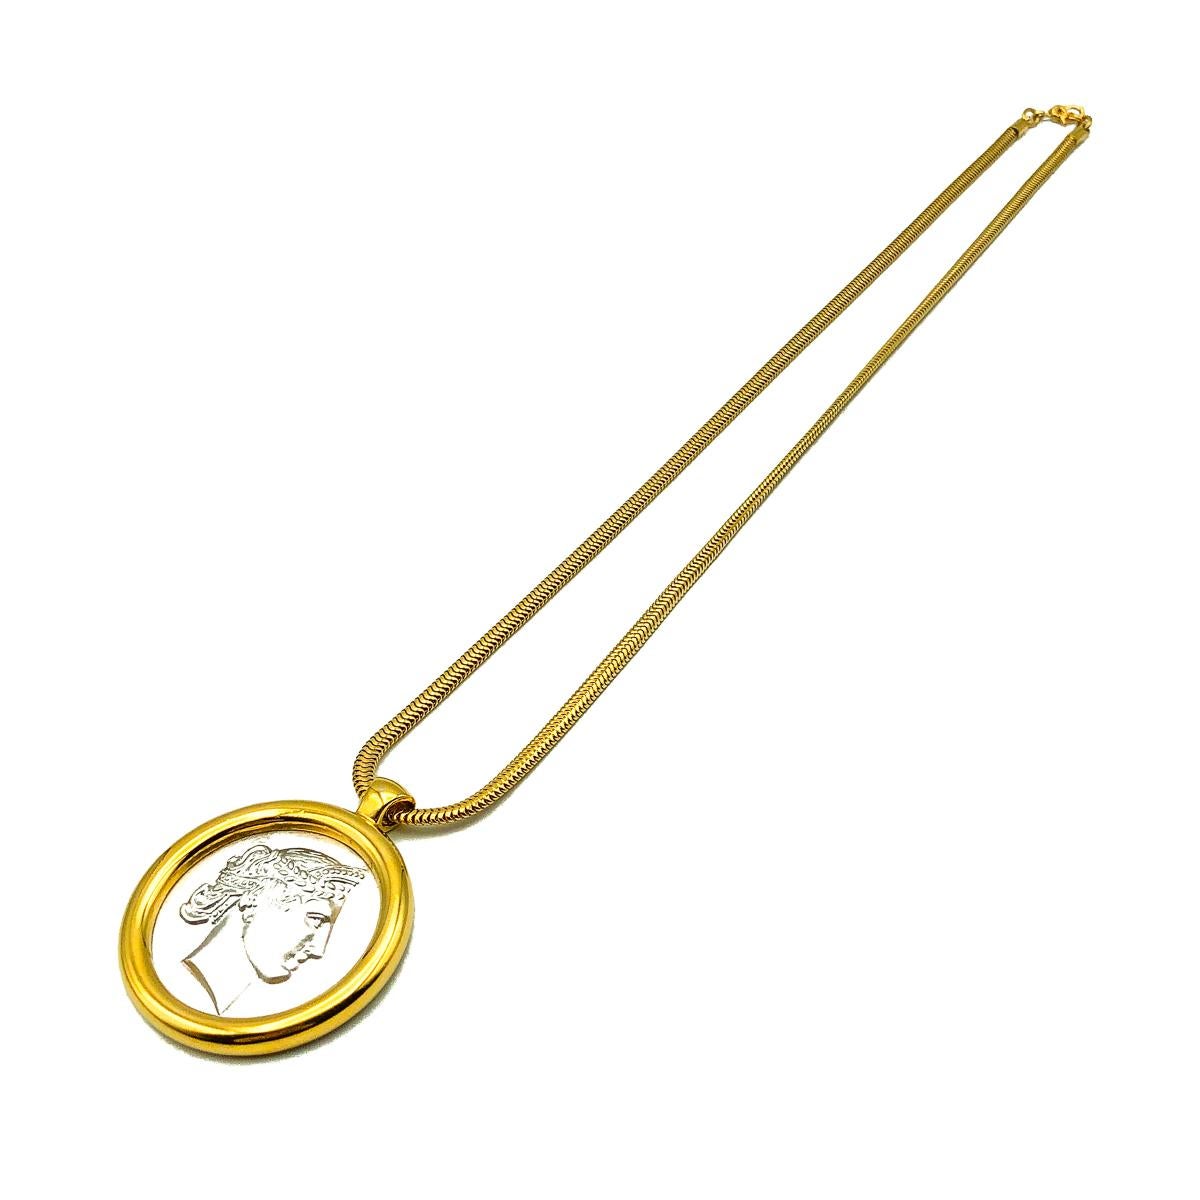 A Vintage Monet Medallion Necklace. Gold plated and silver tone metal. Featuring a statement coin medallion style pendant with a snake link chain.  Signed, in very good vintage condition, chain approx. 51cm with a pendant diameter of approx. 3.5cm.